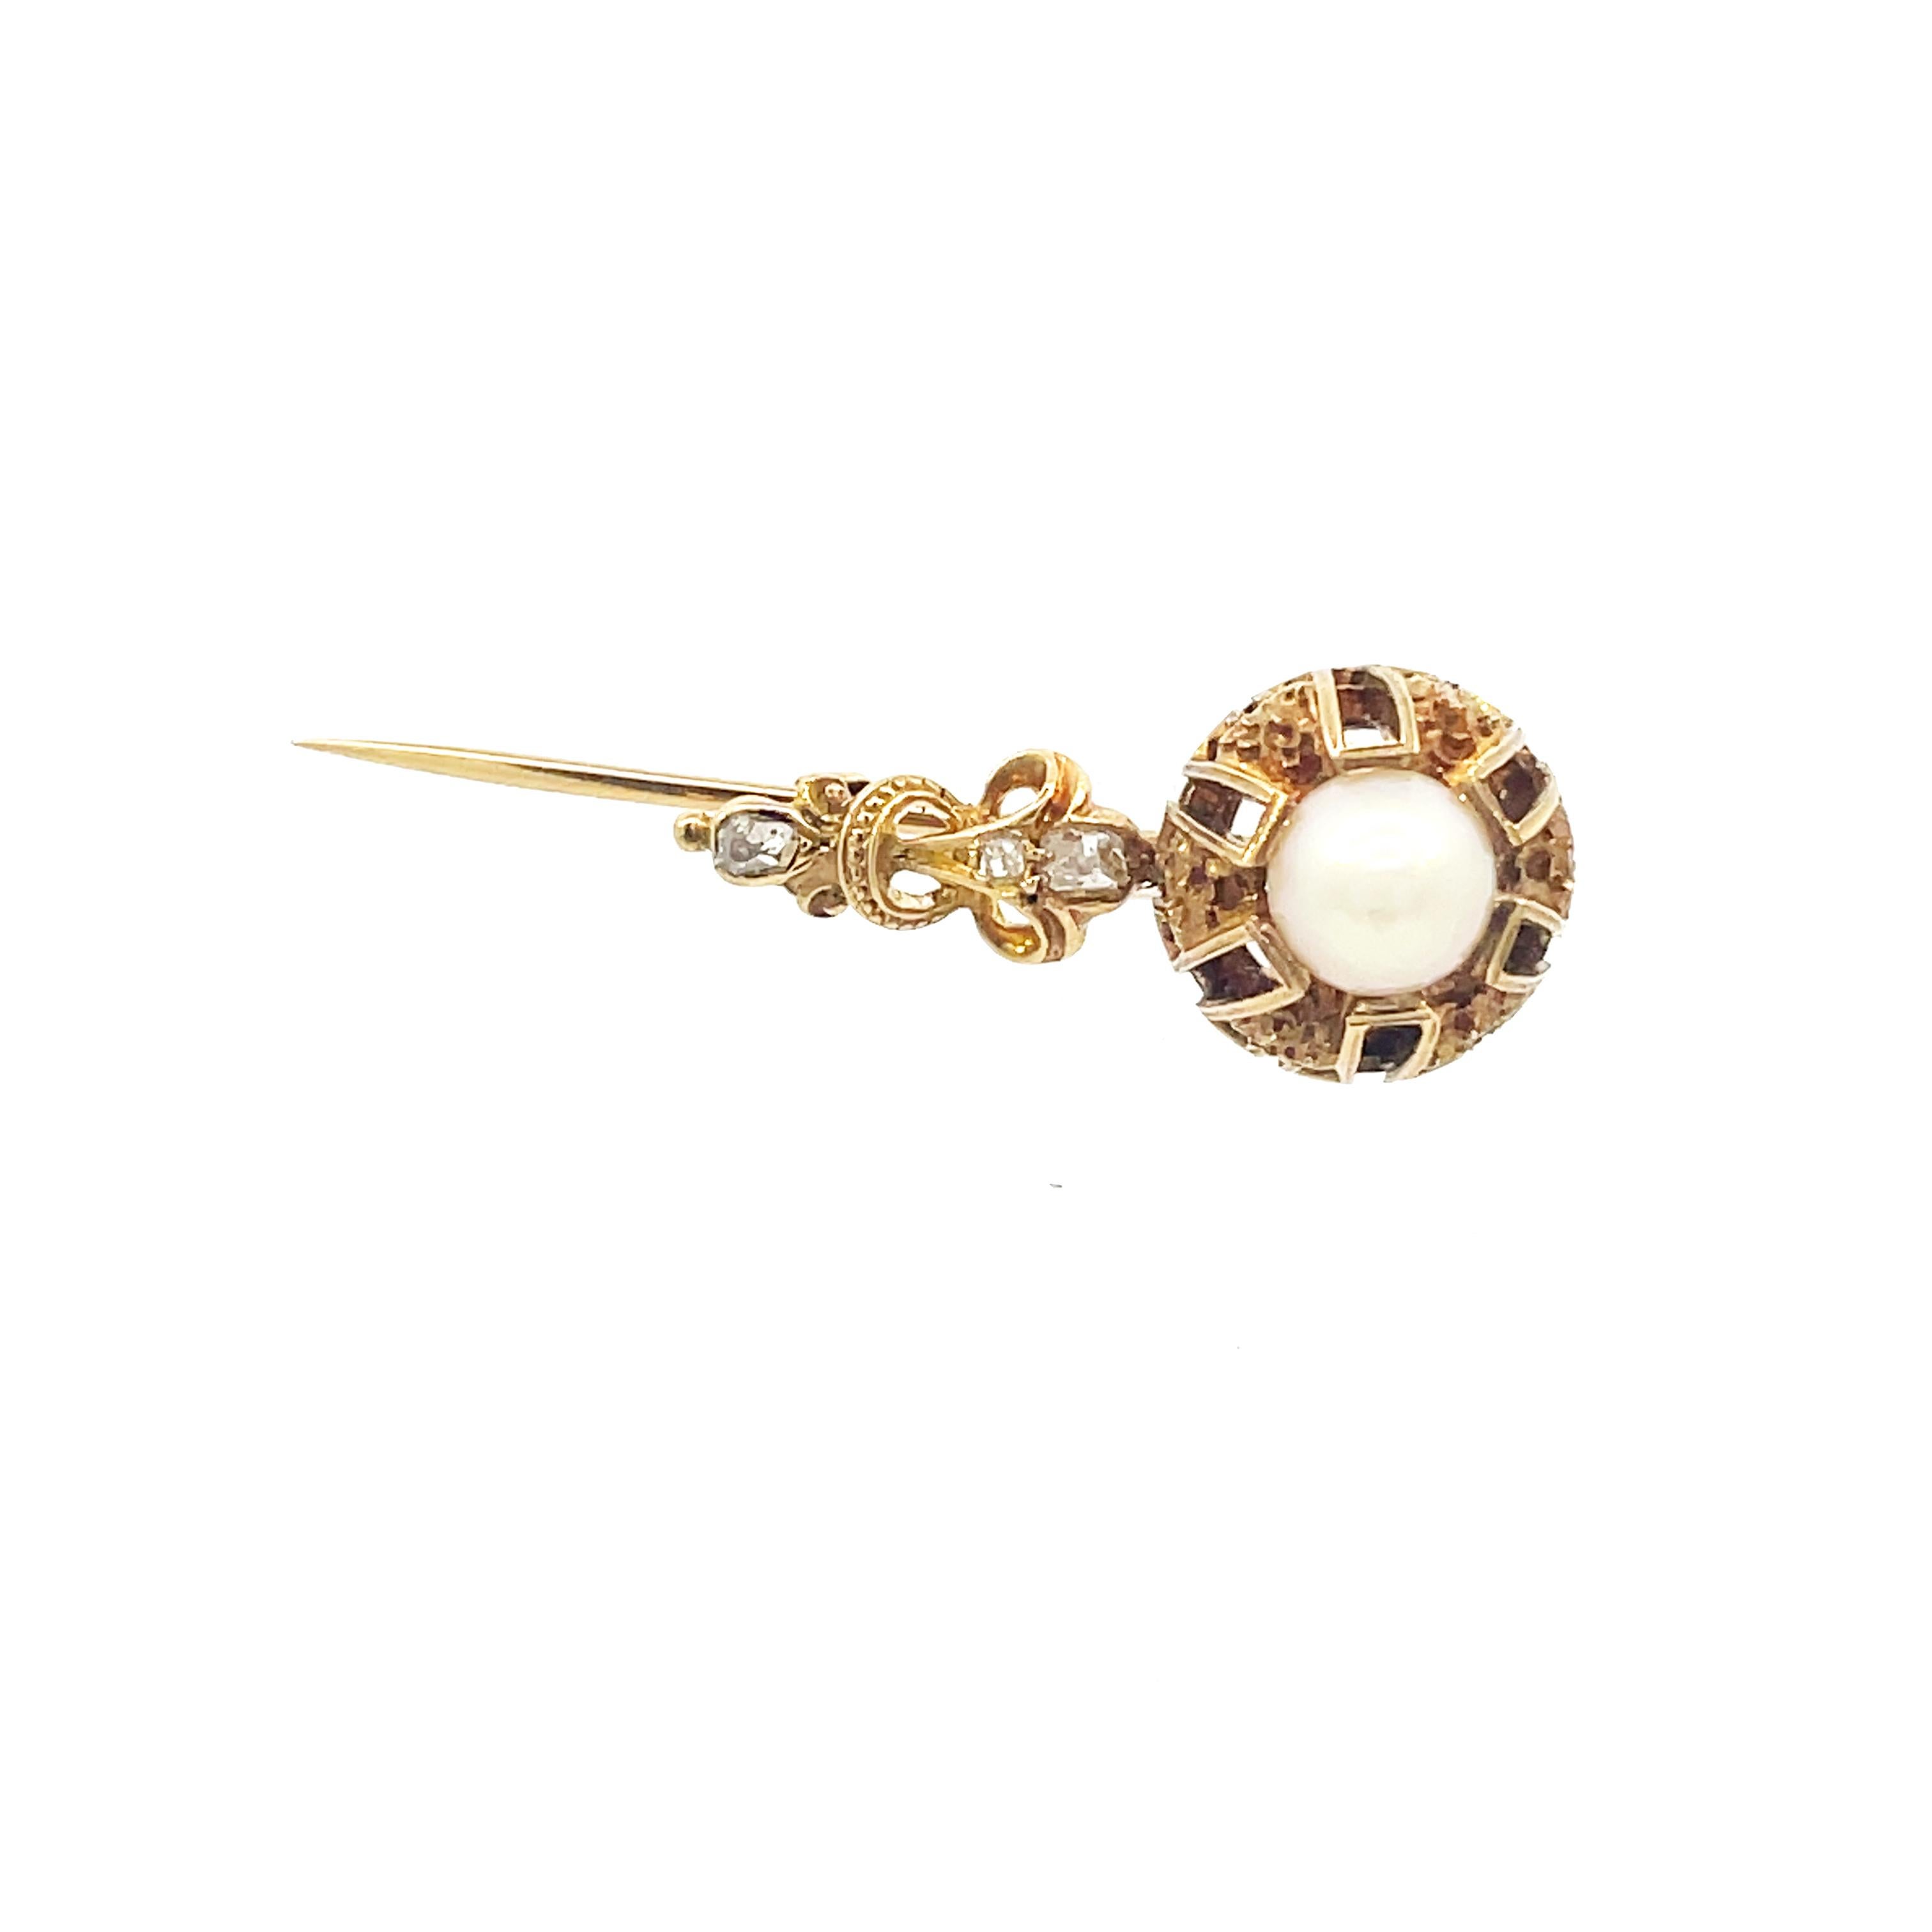 This is an outstanding Victorian pin, crafted in 14K yellow gold, and features a beautiful collection of old mine cut diamonds and a lovely natural pearl. This elegant pin is adorned with beautifully engraved details along the body of the pin, with